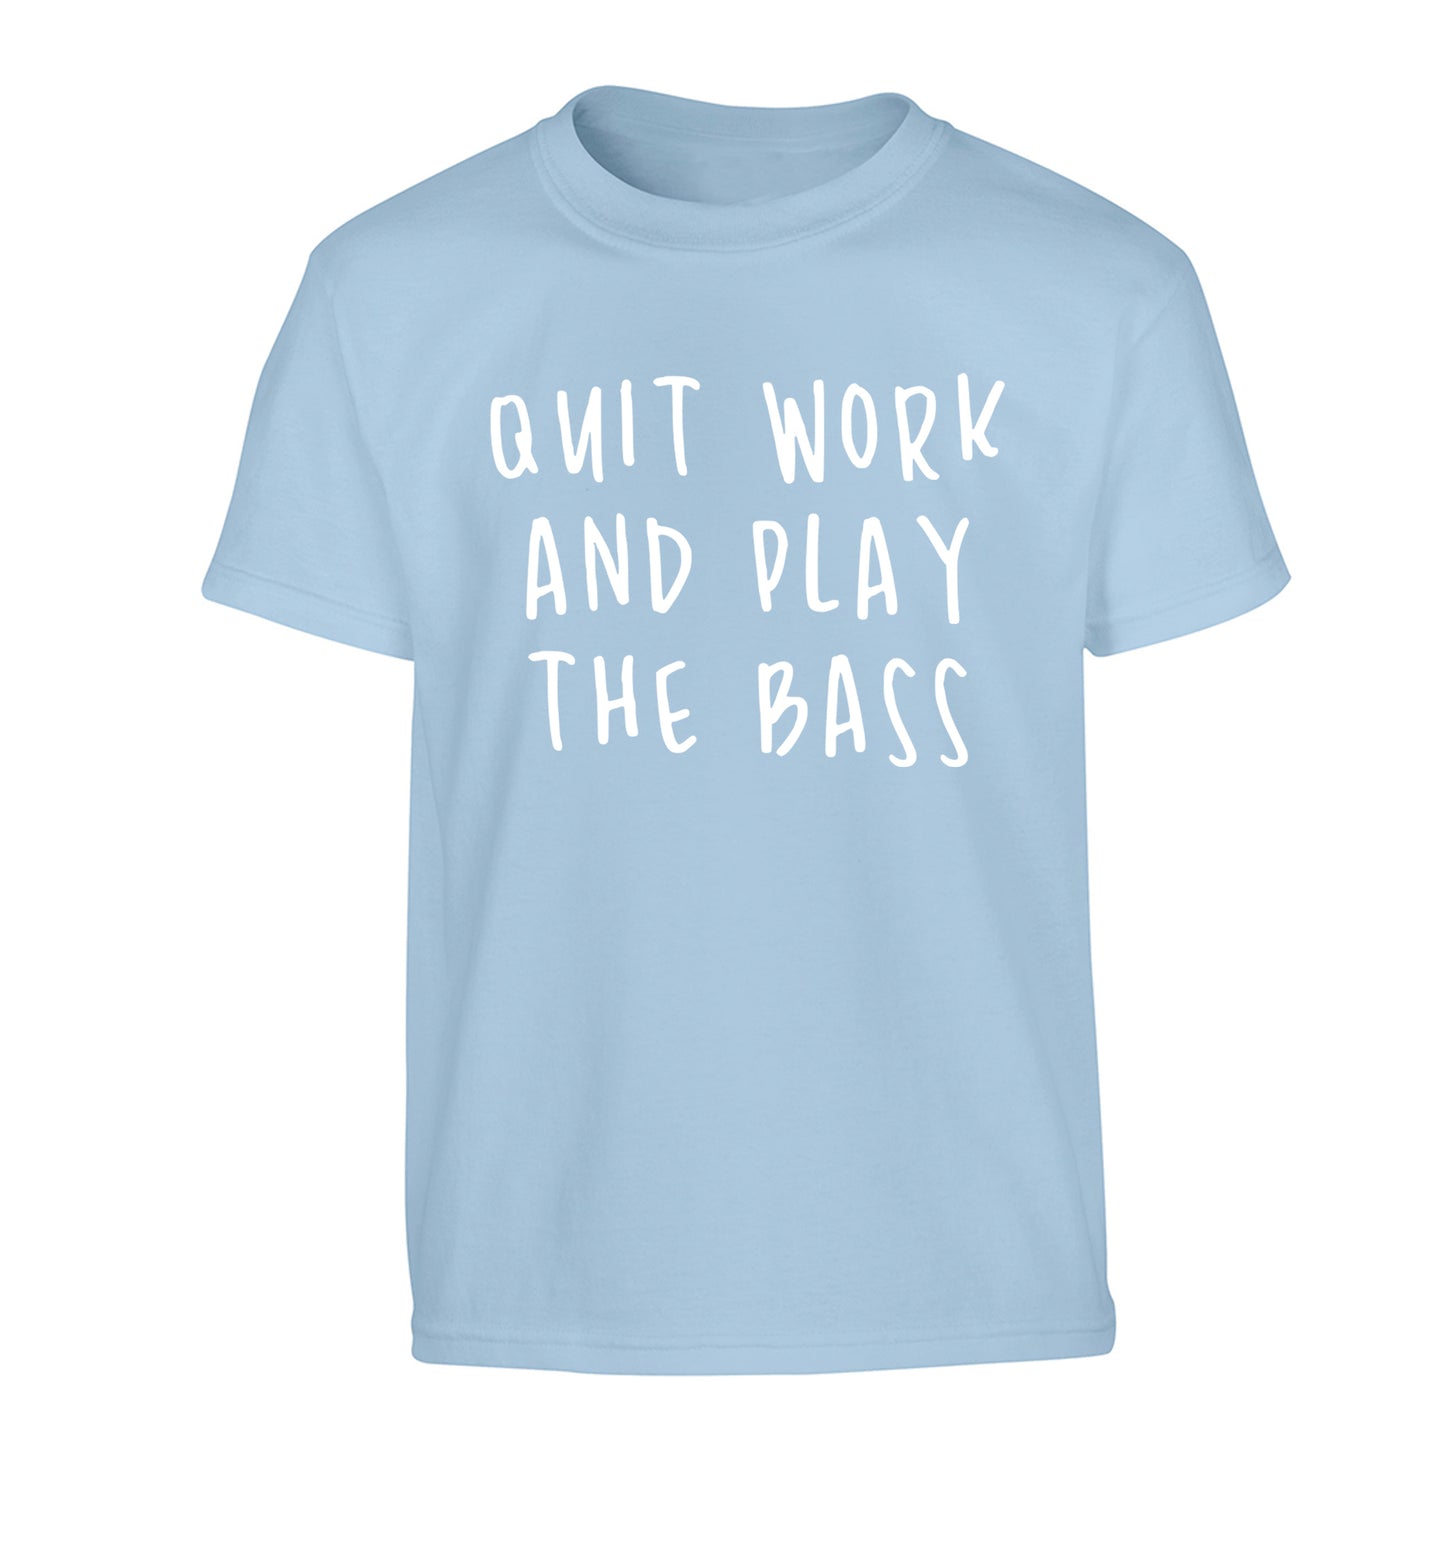 Quit work and play the bass Children's light blue Tshirt 12-14 Years